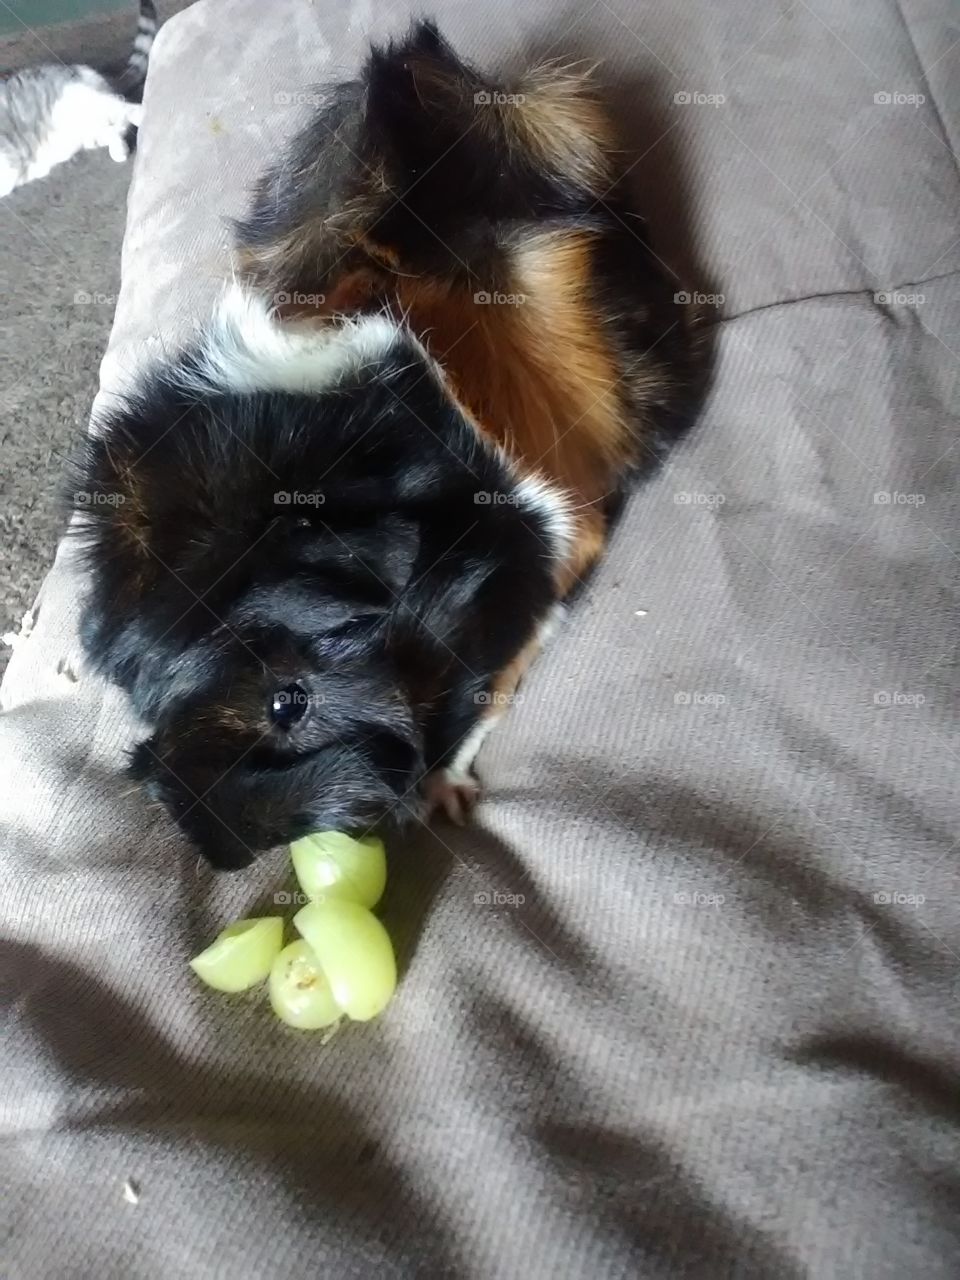 nice juicy grapes eating guinea pigs love to eat